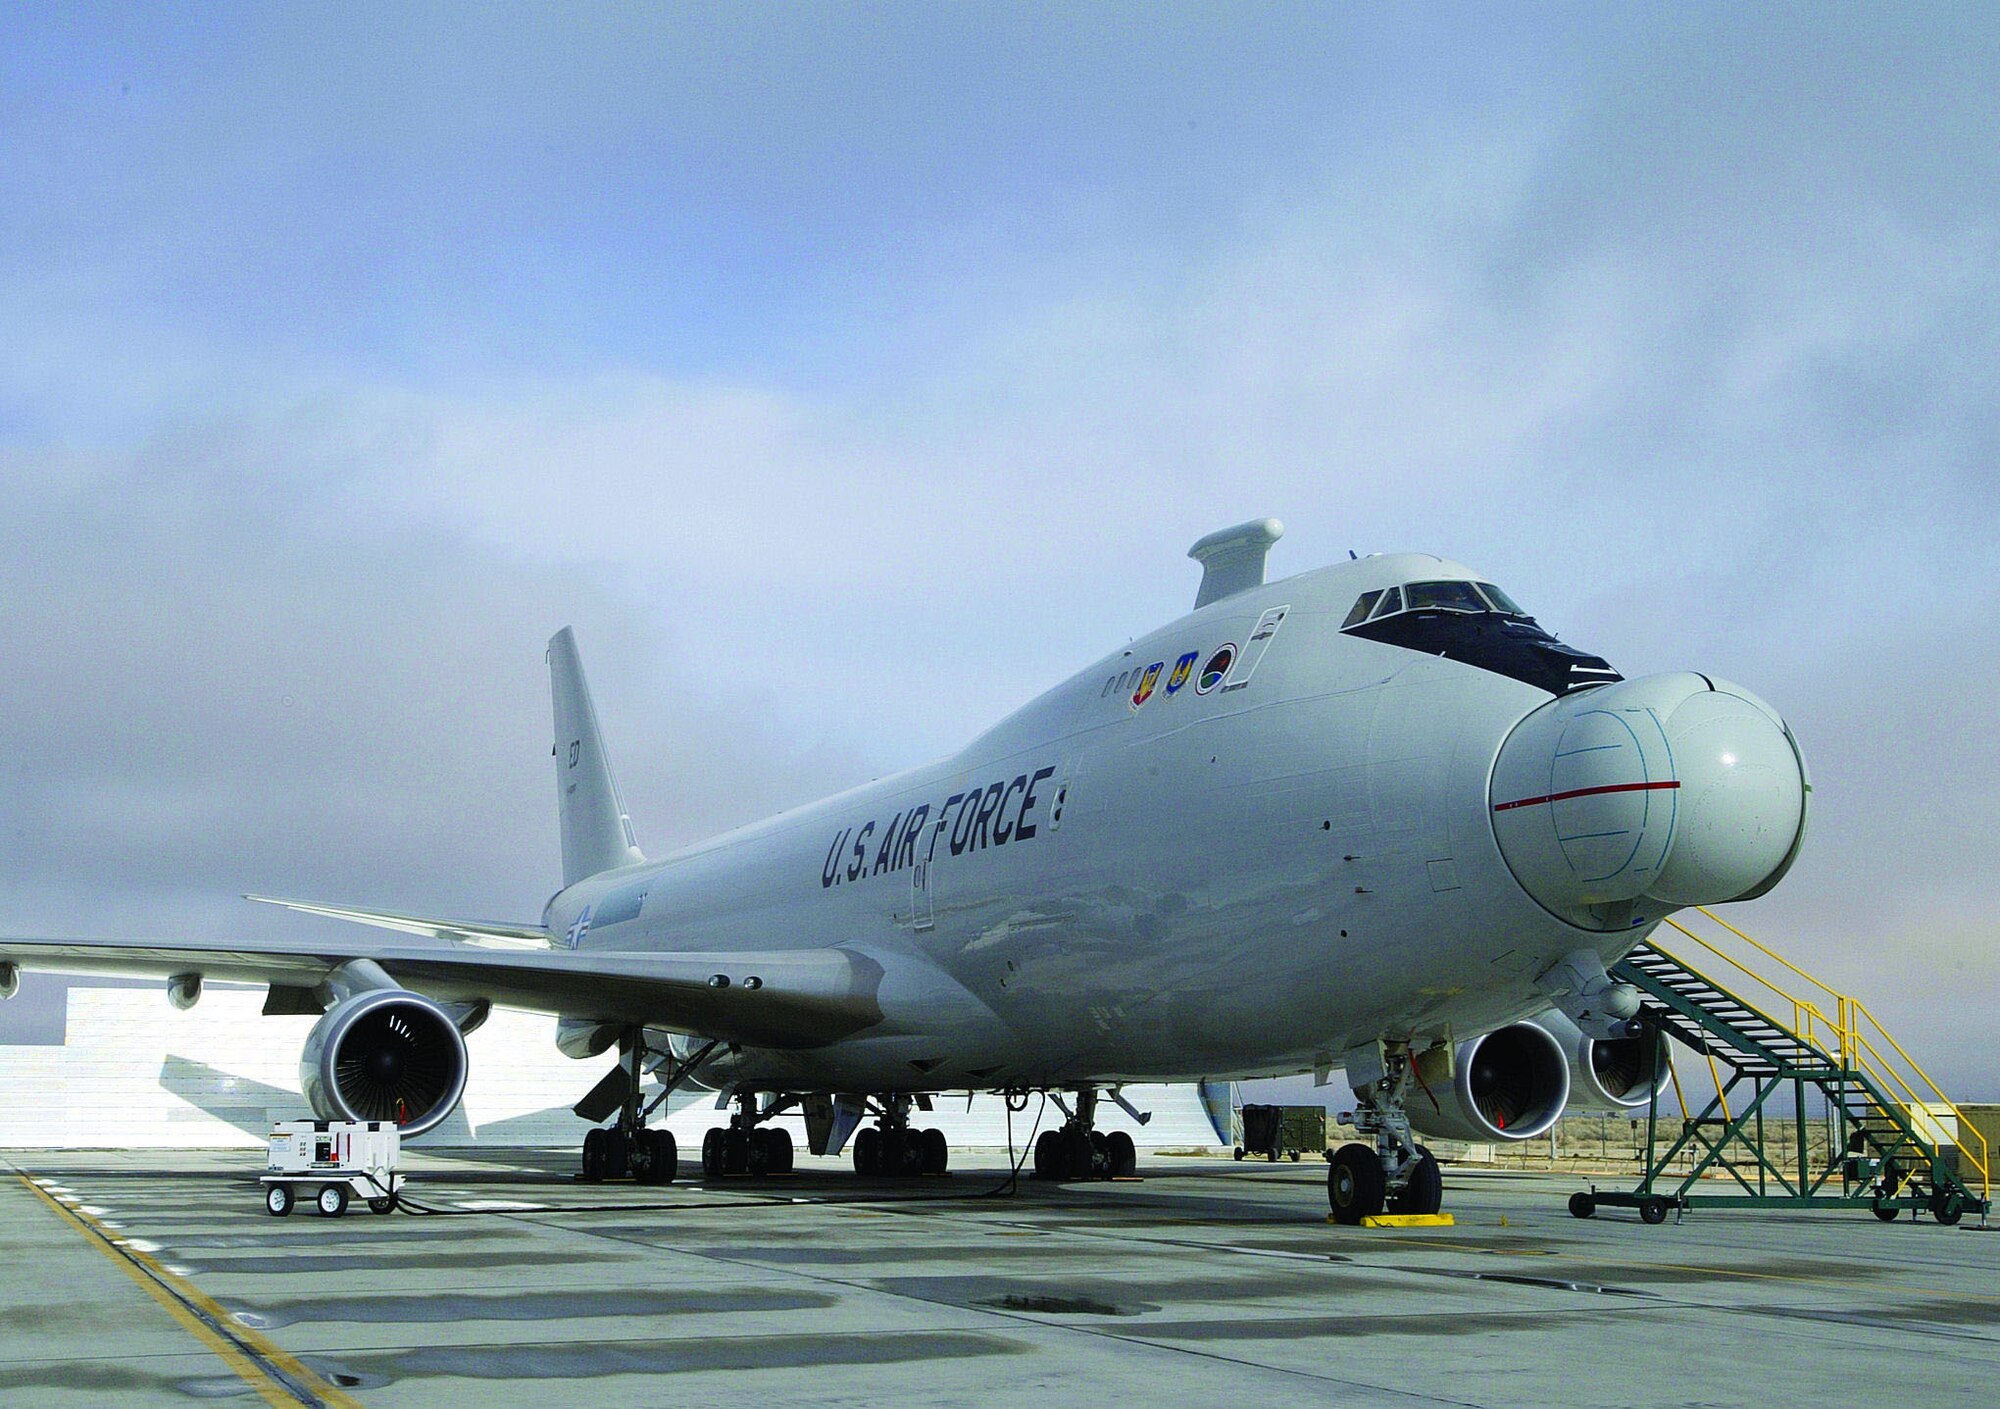 The Airborne Laser program, formerly of the 452nd Flight Test Squadron, now falls under the 417th Flight Test Squadron, which was activated in a ceremony March 16, 2006. The 417th FLTS, comprised of about 750 people, including the contractor workforce and the government workforce, is responsible for flight testing the YAL-1A Airborne Laser aircraft, shown above. The aircraft is currently in Wichita, Kan., receiving modifications to the sub-structure of the aircraft to accommodate the integration of the weapons system.  (Photo by Master Sgt. James Graham)